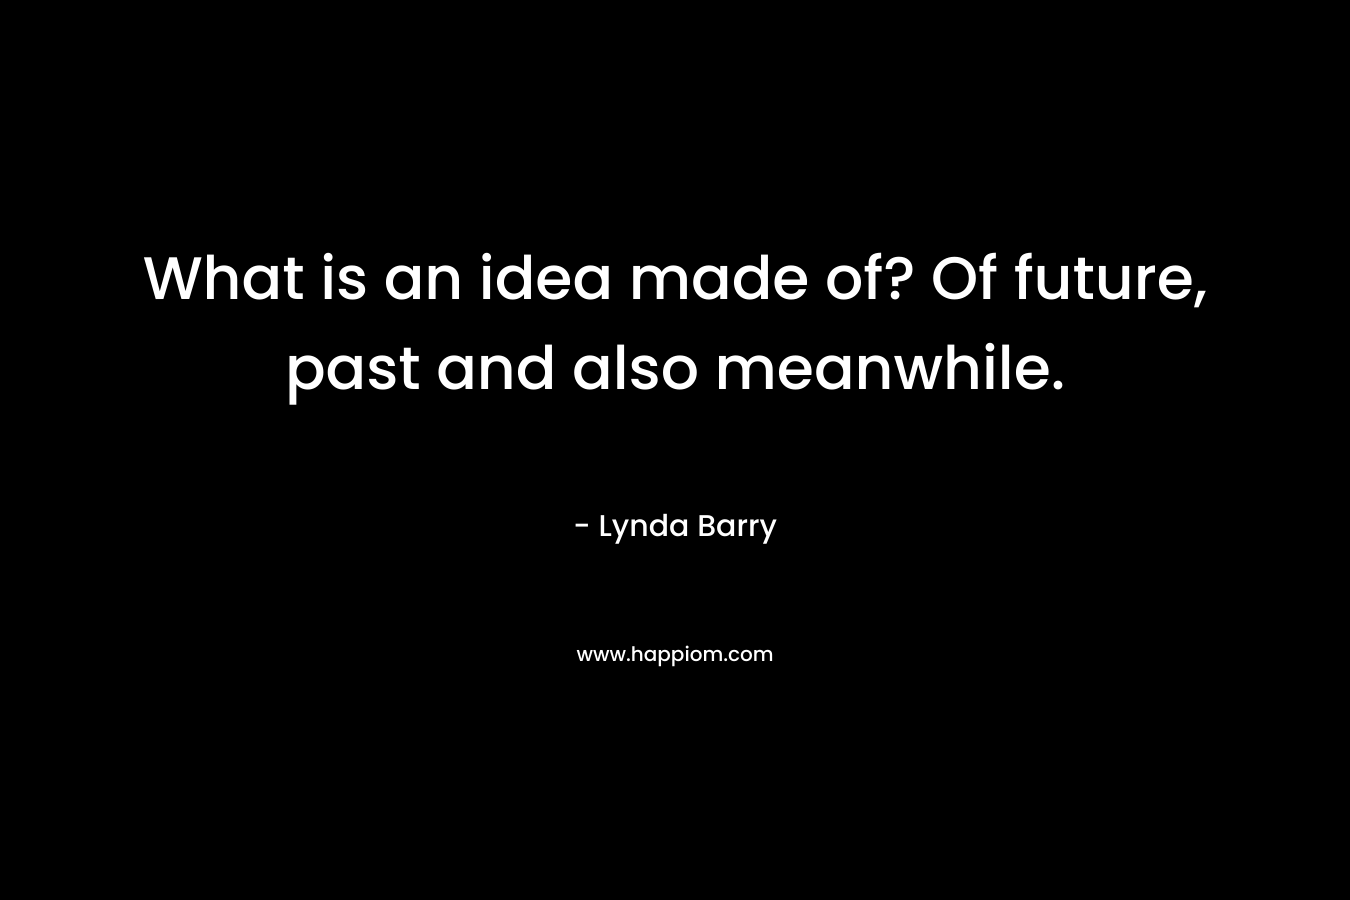 What is an idea made of? Of future, past and also meanwhile.